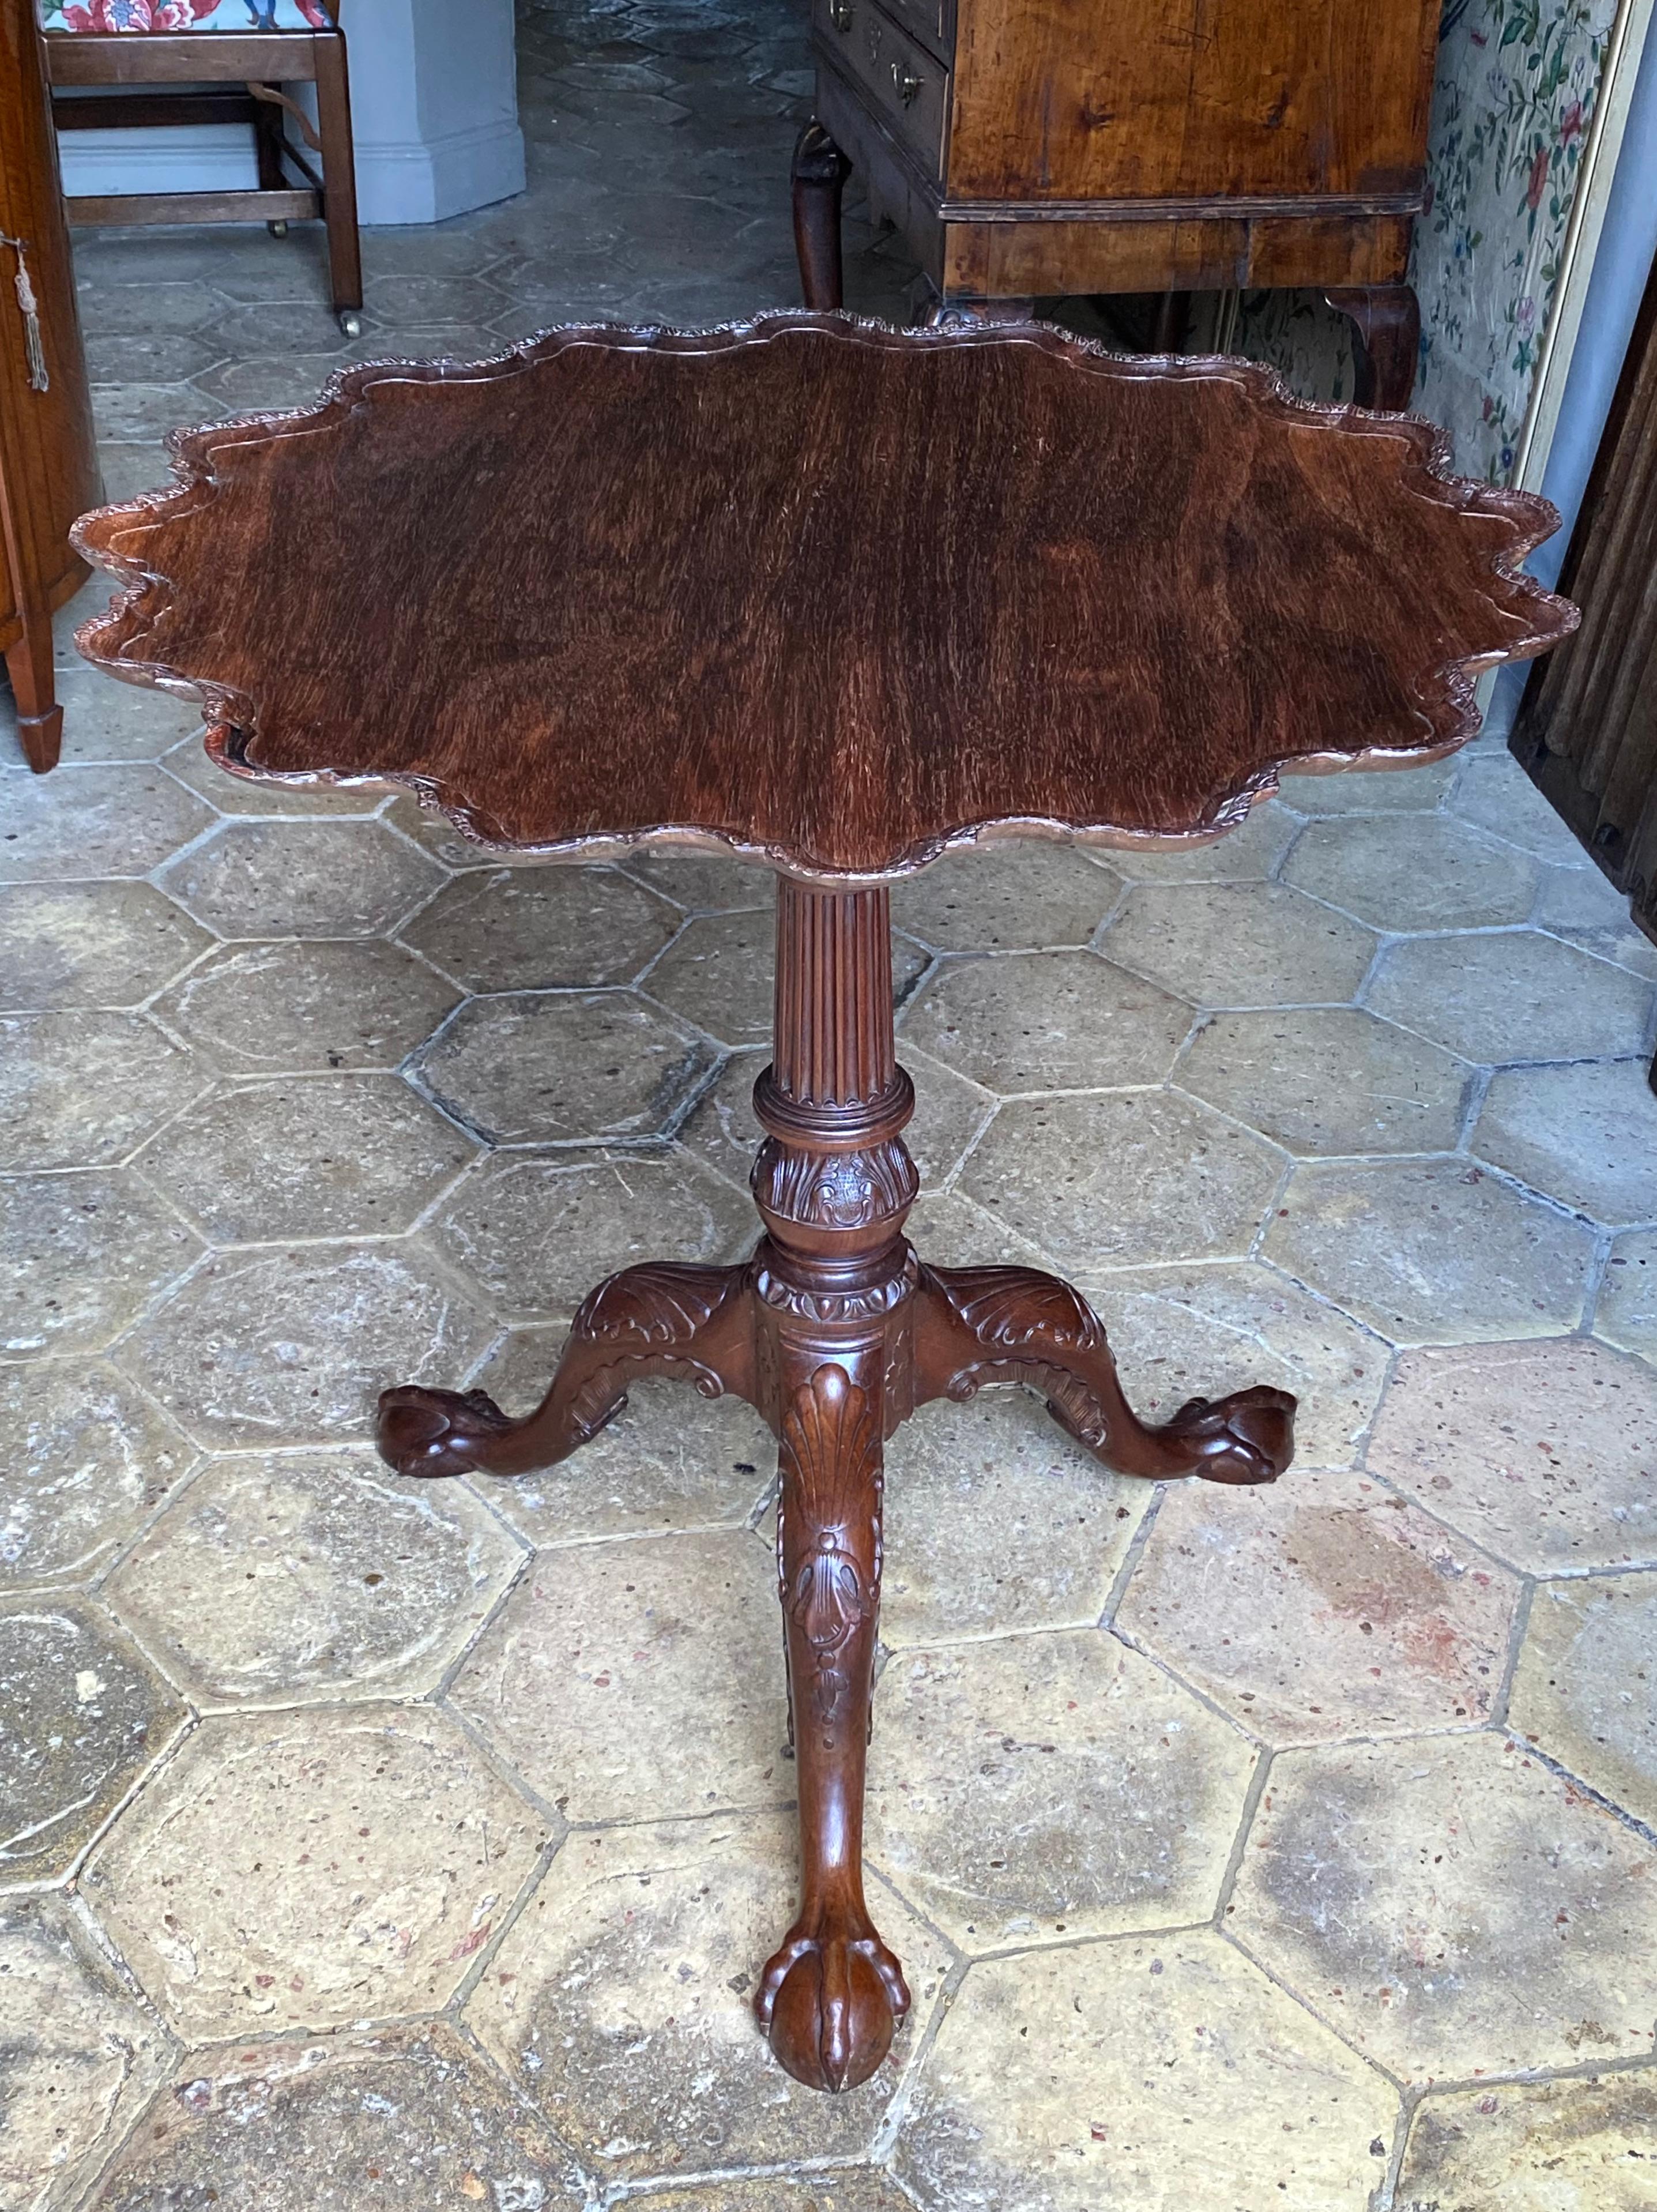 A very rare and finely-carved China trade padouk tripod table. Canton, ca 1750-1760.
Wonderful carving to the base, and a most unusual bold border to the top. Its outstanding idiosyncrasies are indicative of China Trade origins.
Most likely made in